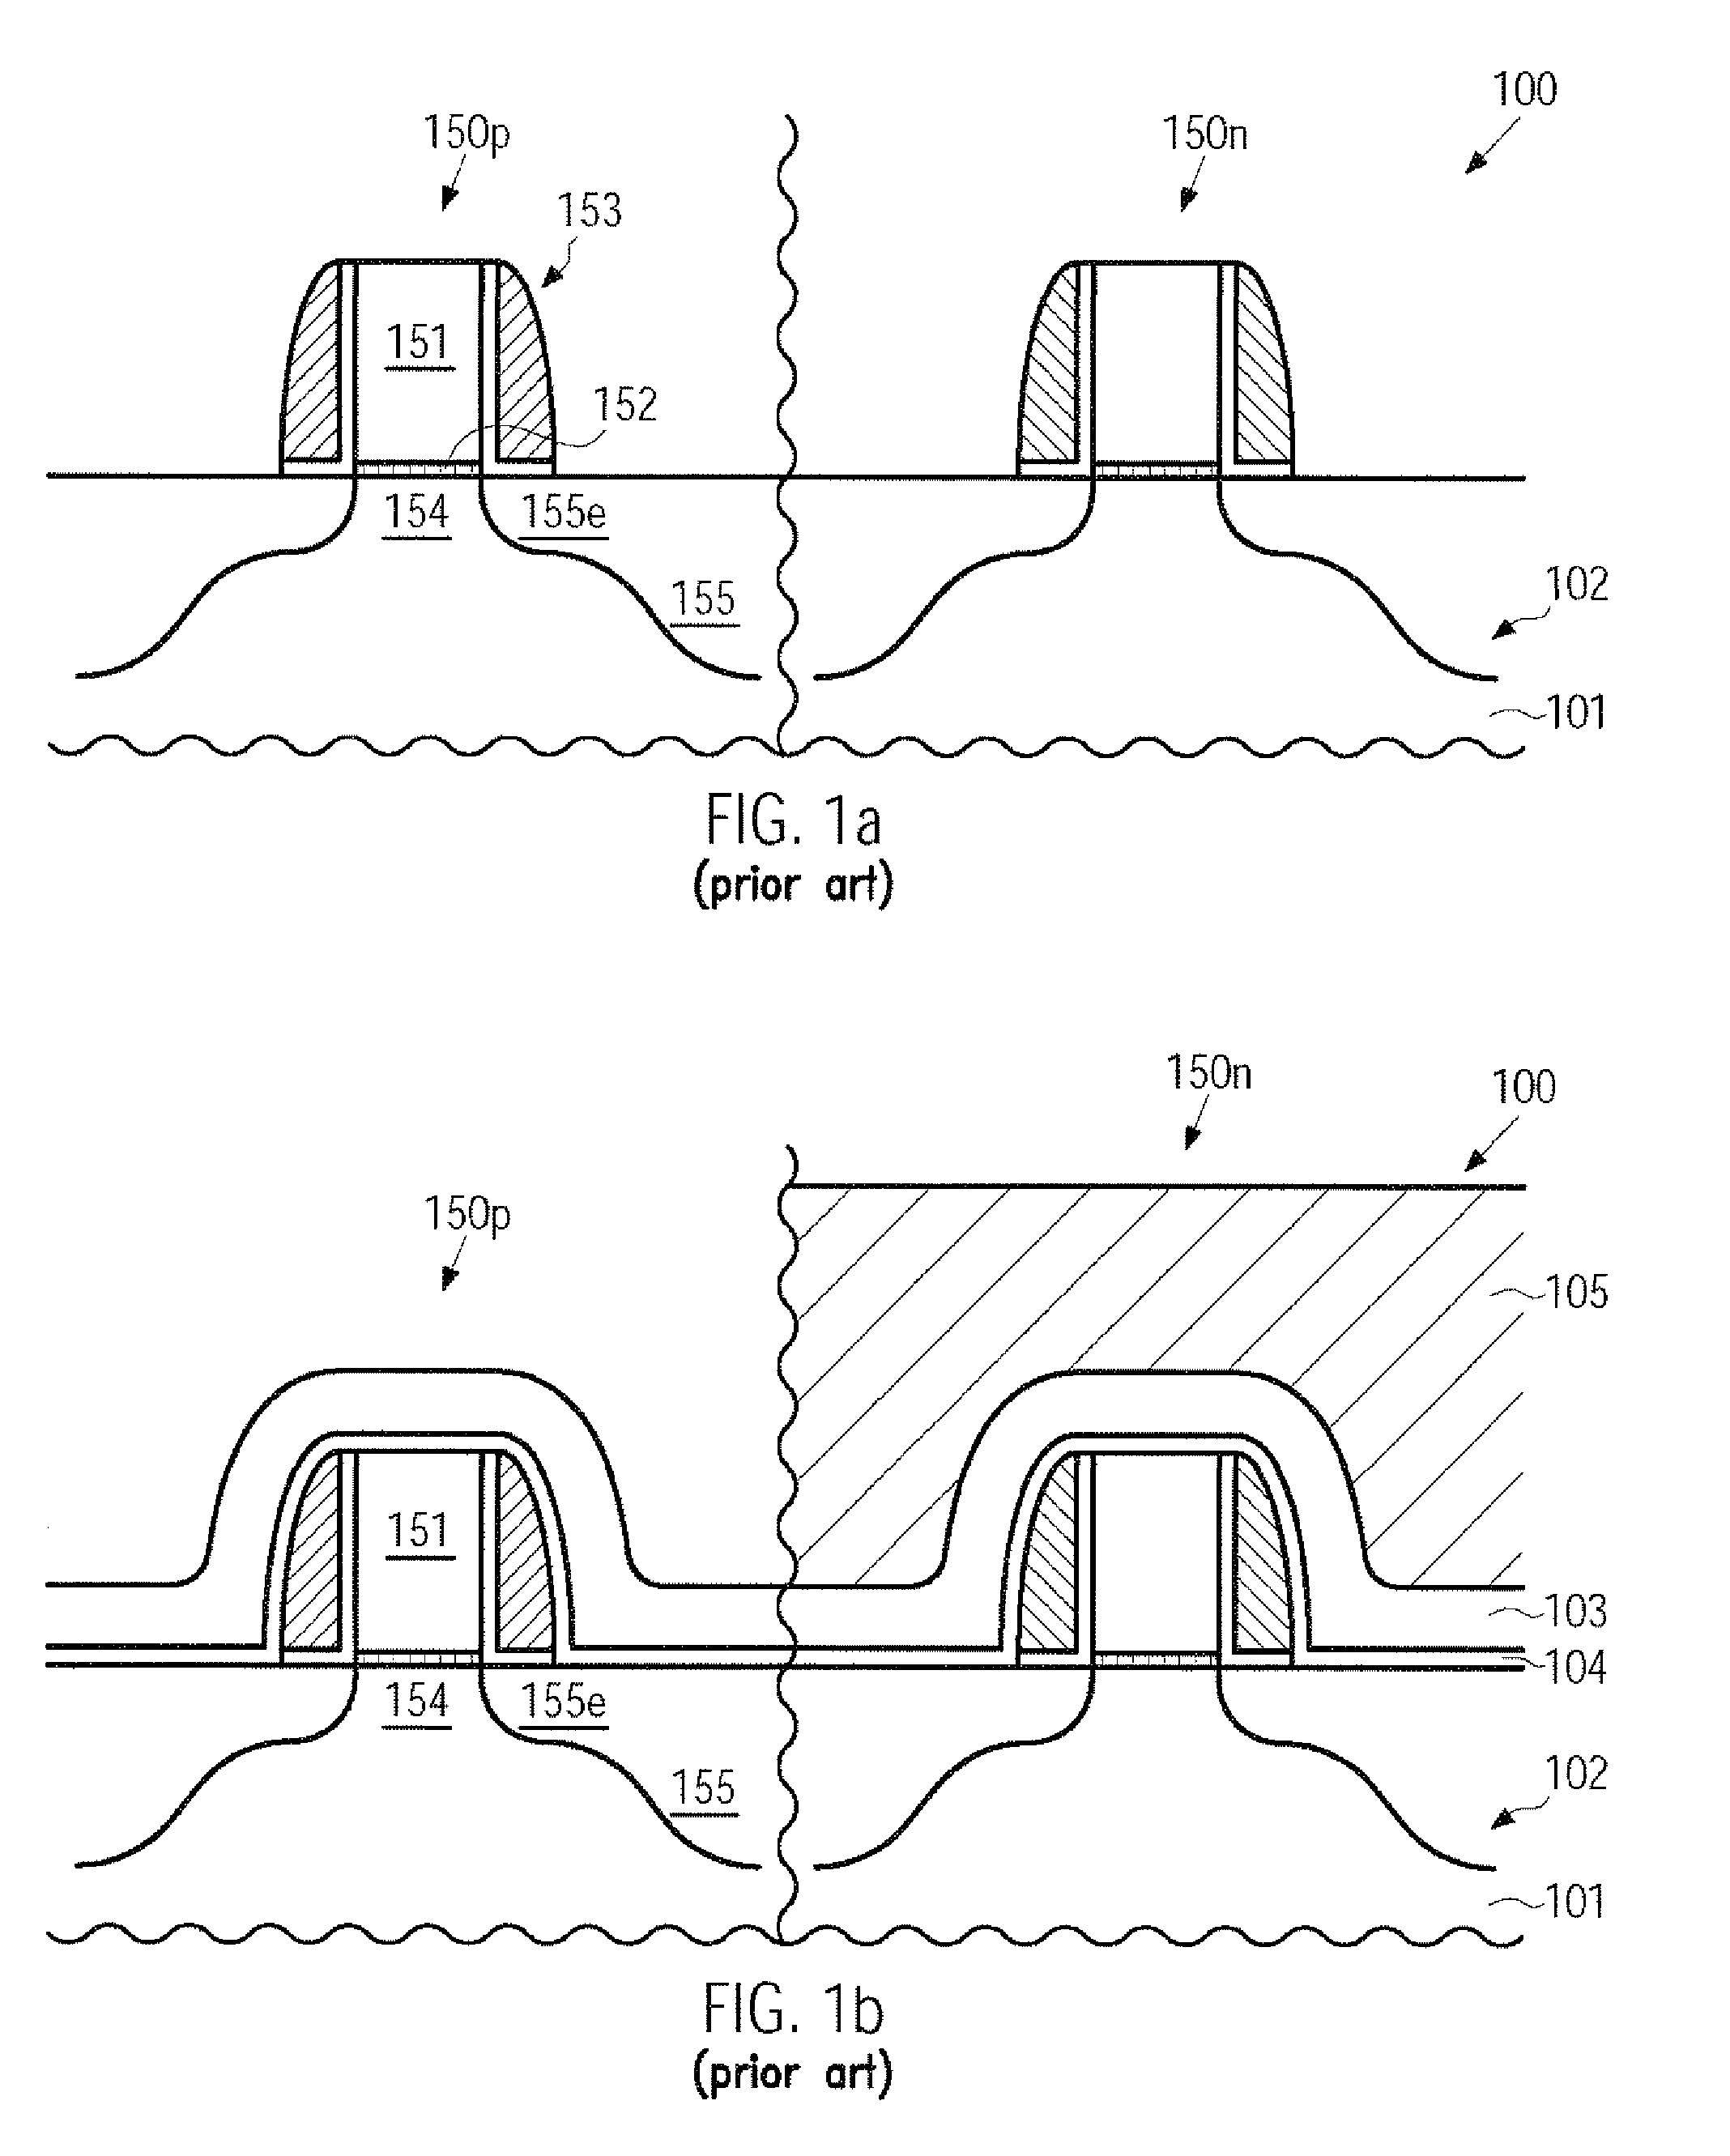 Method for selectively forming strain in a transistor by a stress memorization technique without adding additional lithography steps